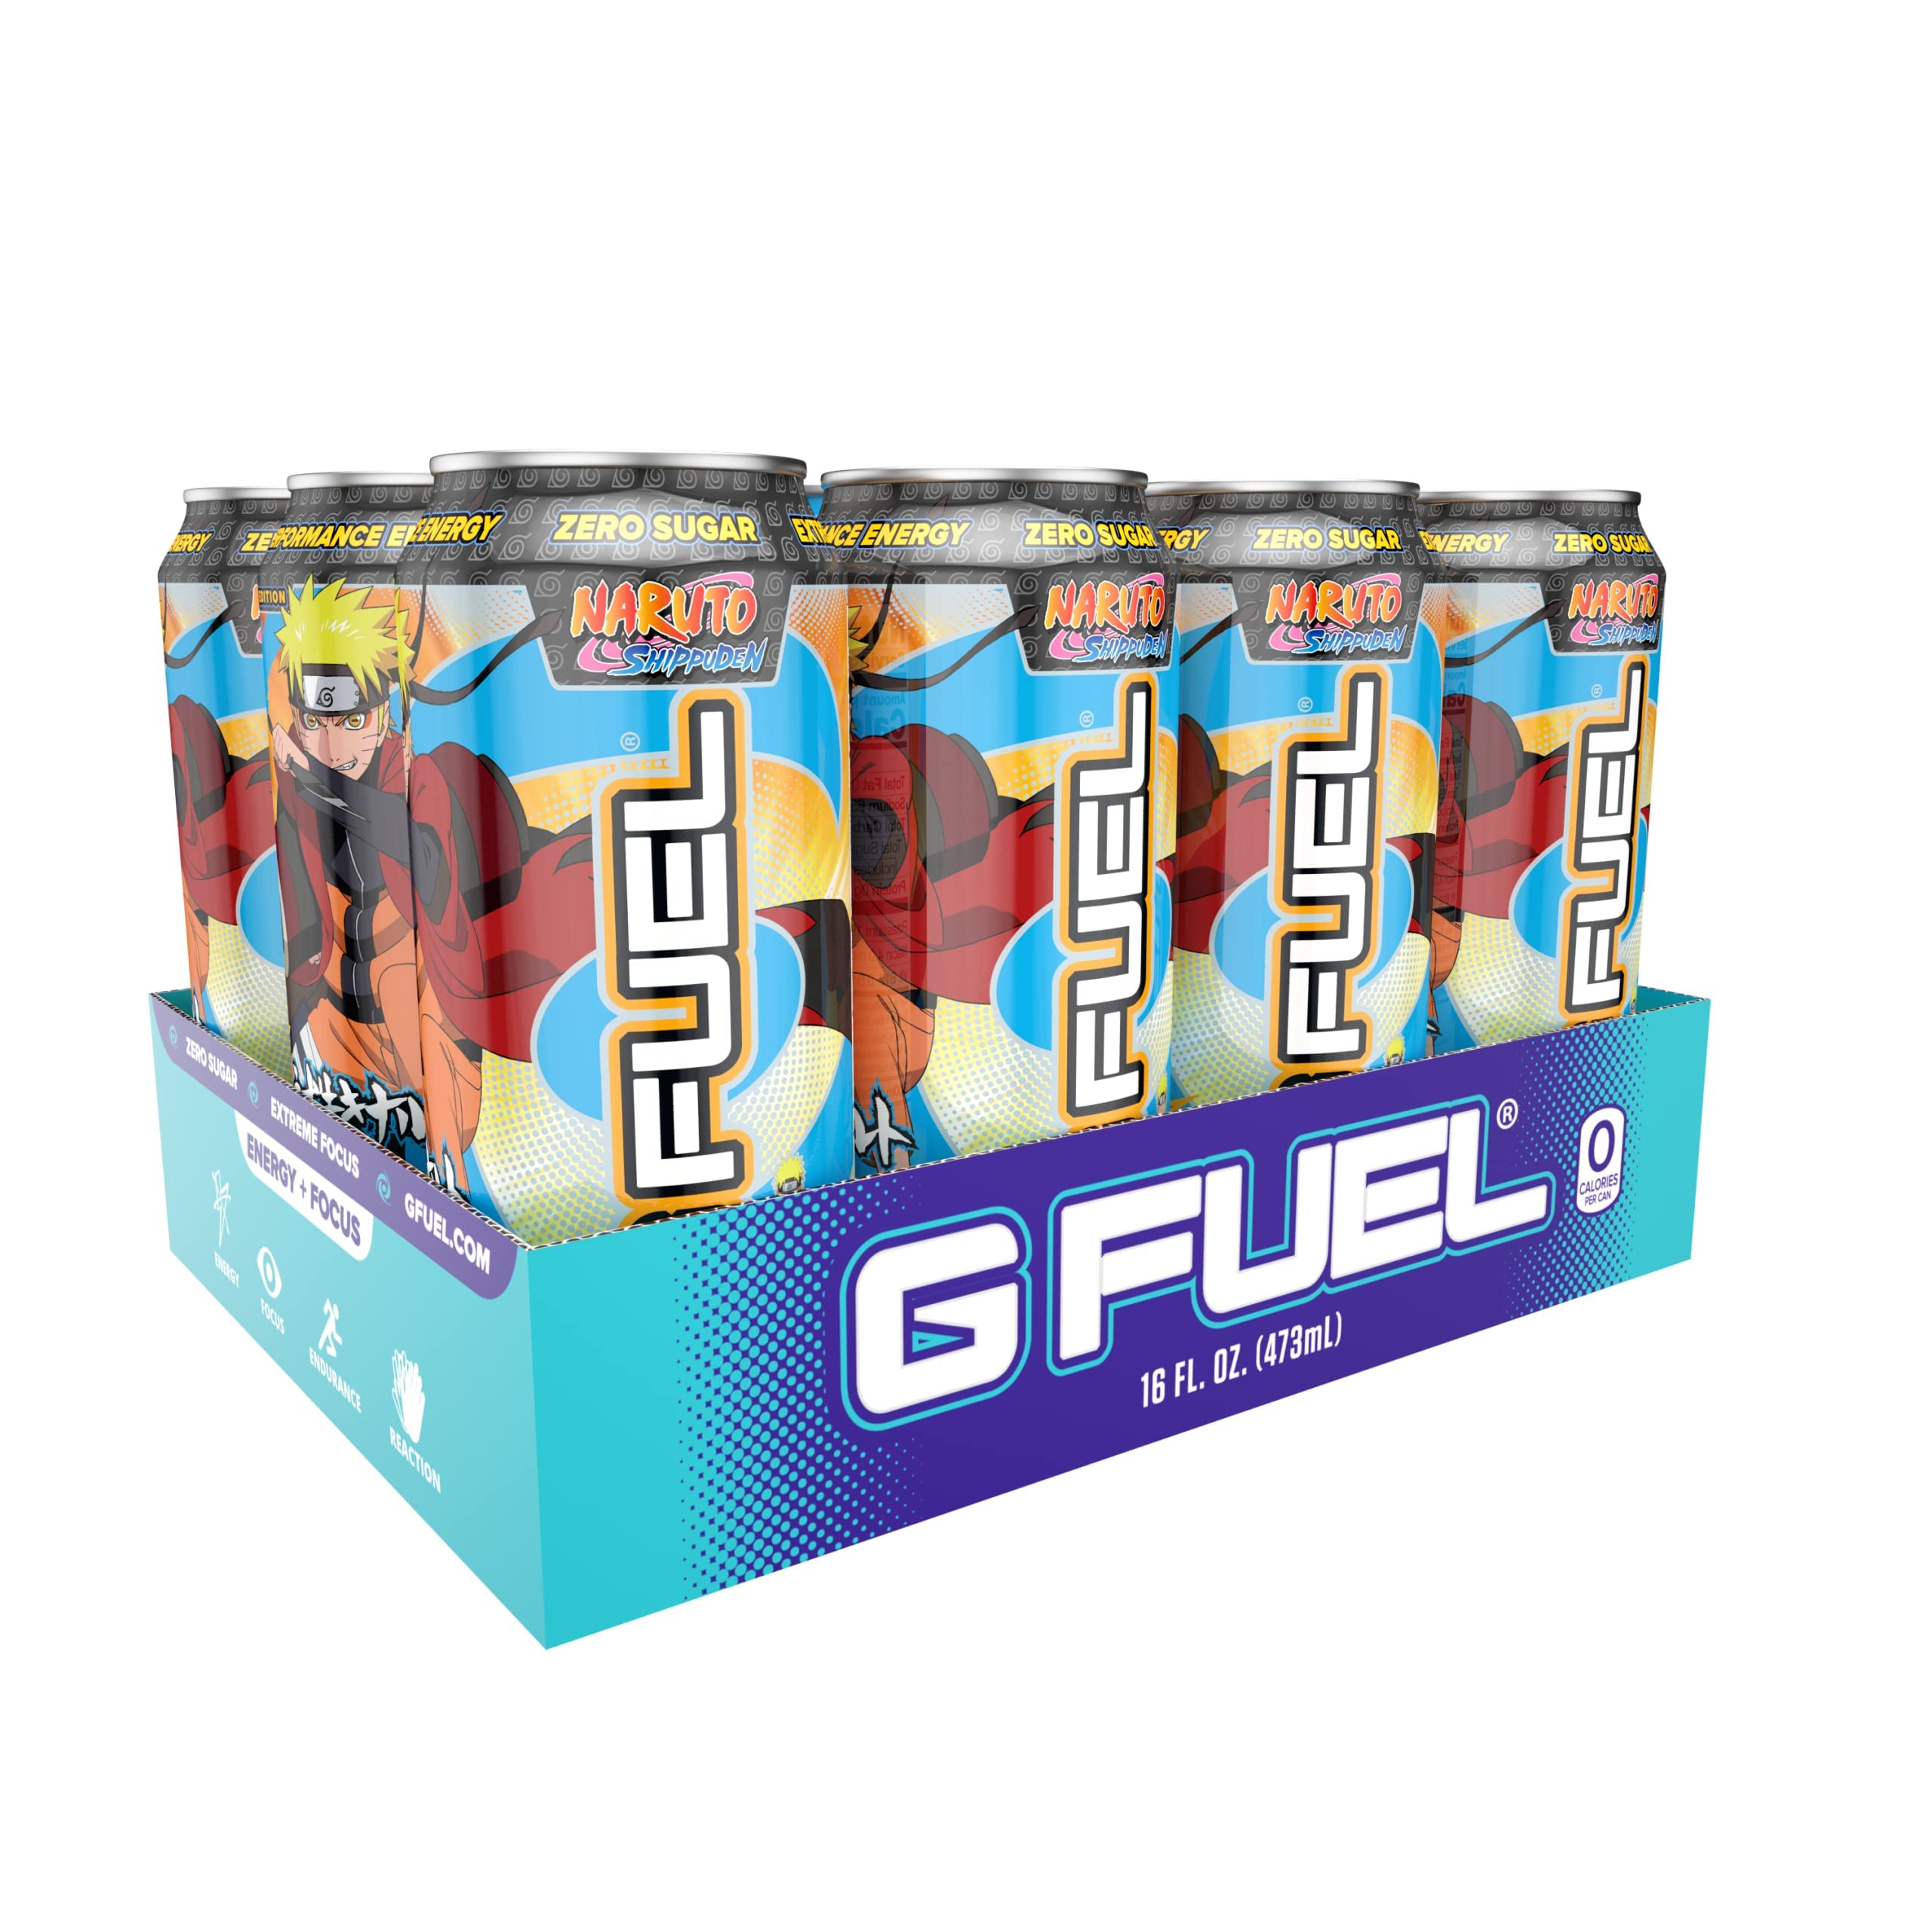 g Fuel Sage Mode Energy Drink, 16 oz can, 12-pack case, Inspired by Naruto Shippuden